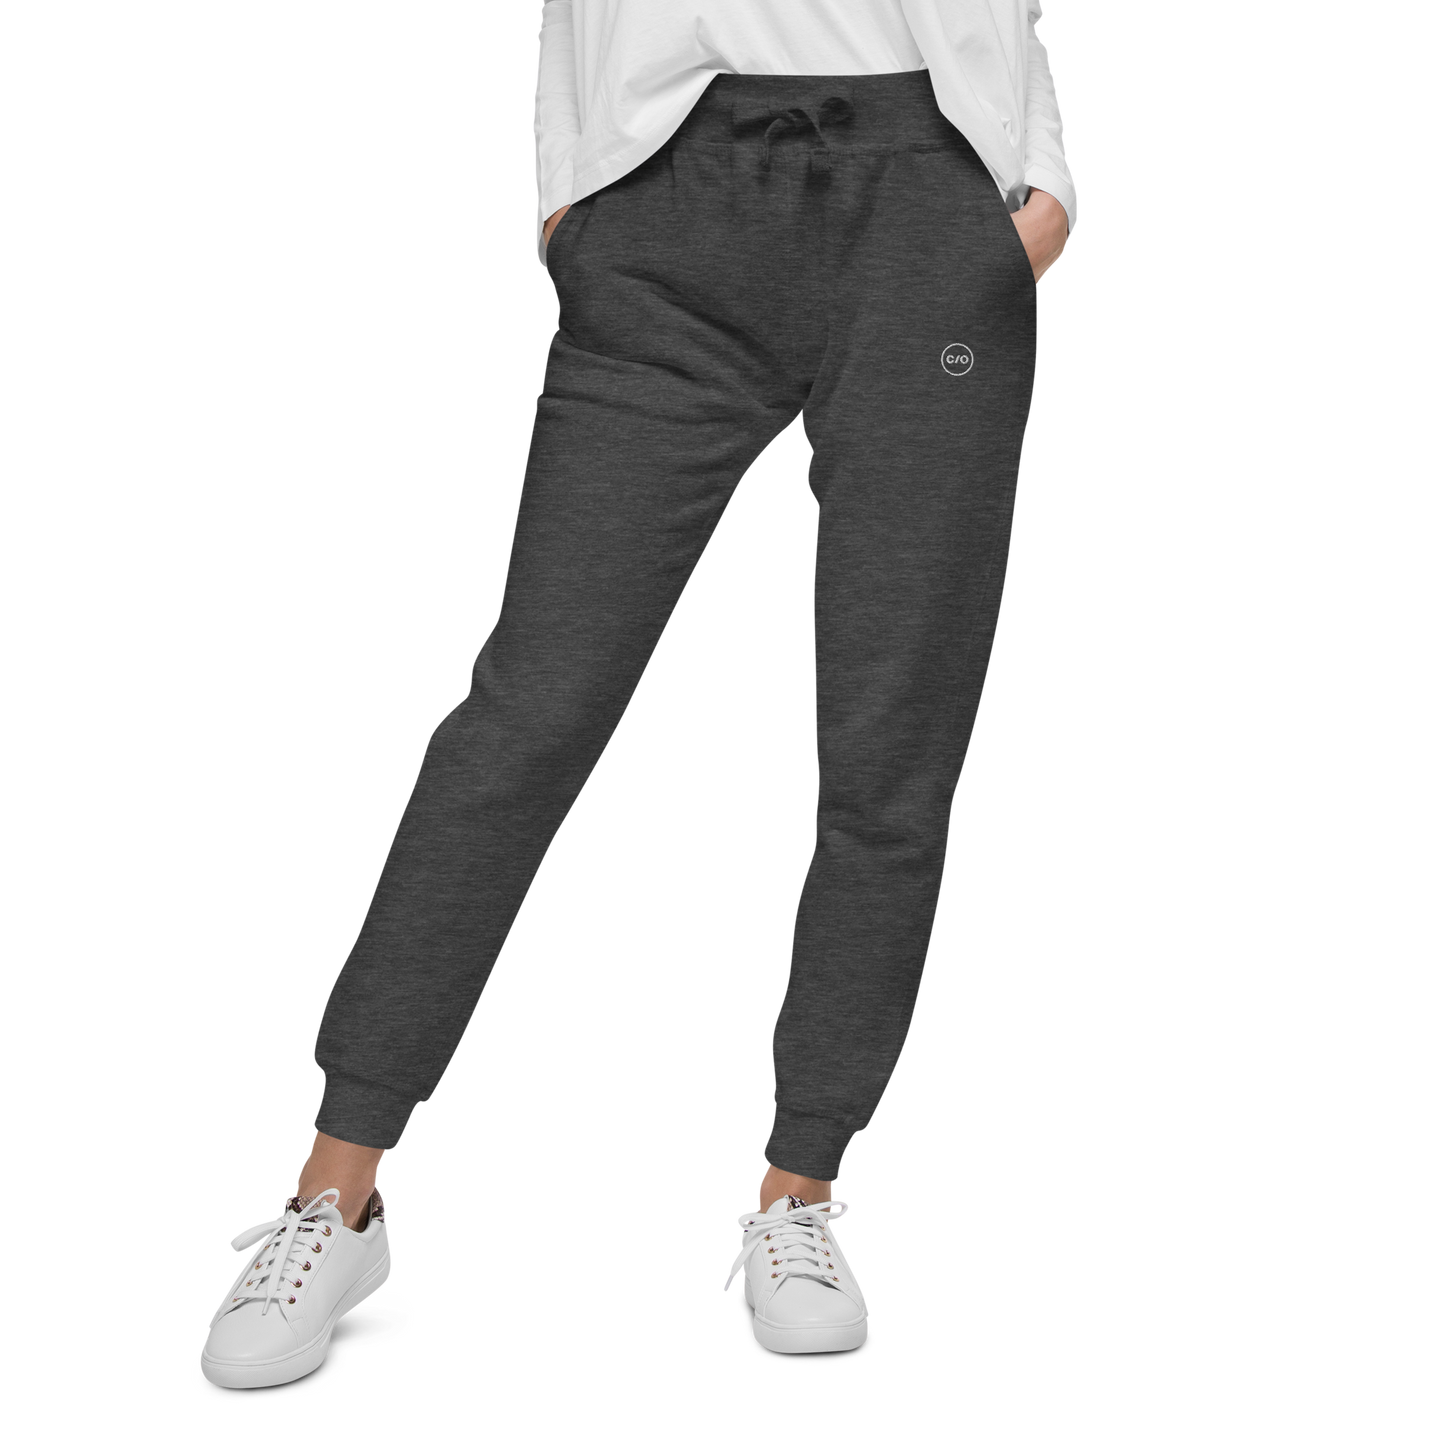 Neue Supply Co. Women's Performance Jogger in Charcoal Heather